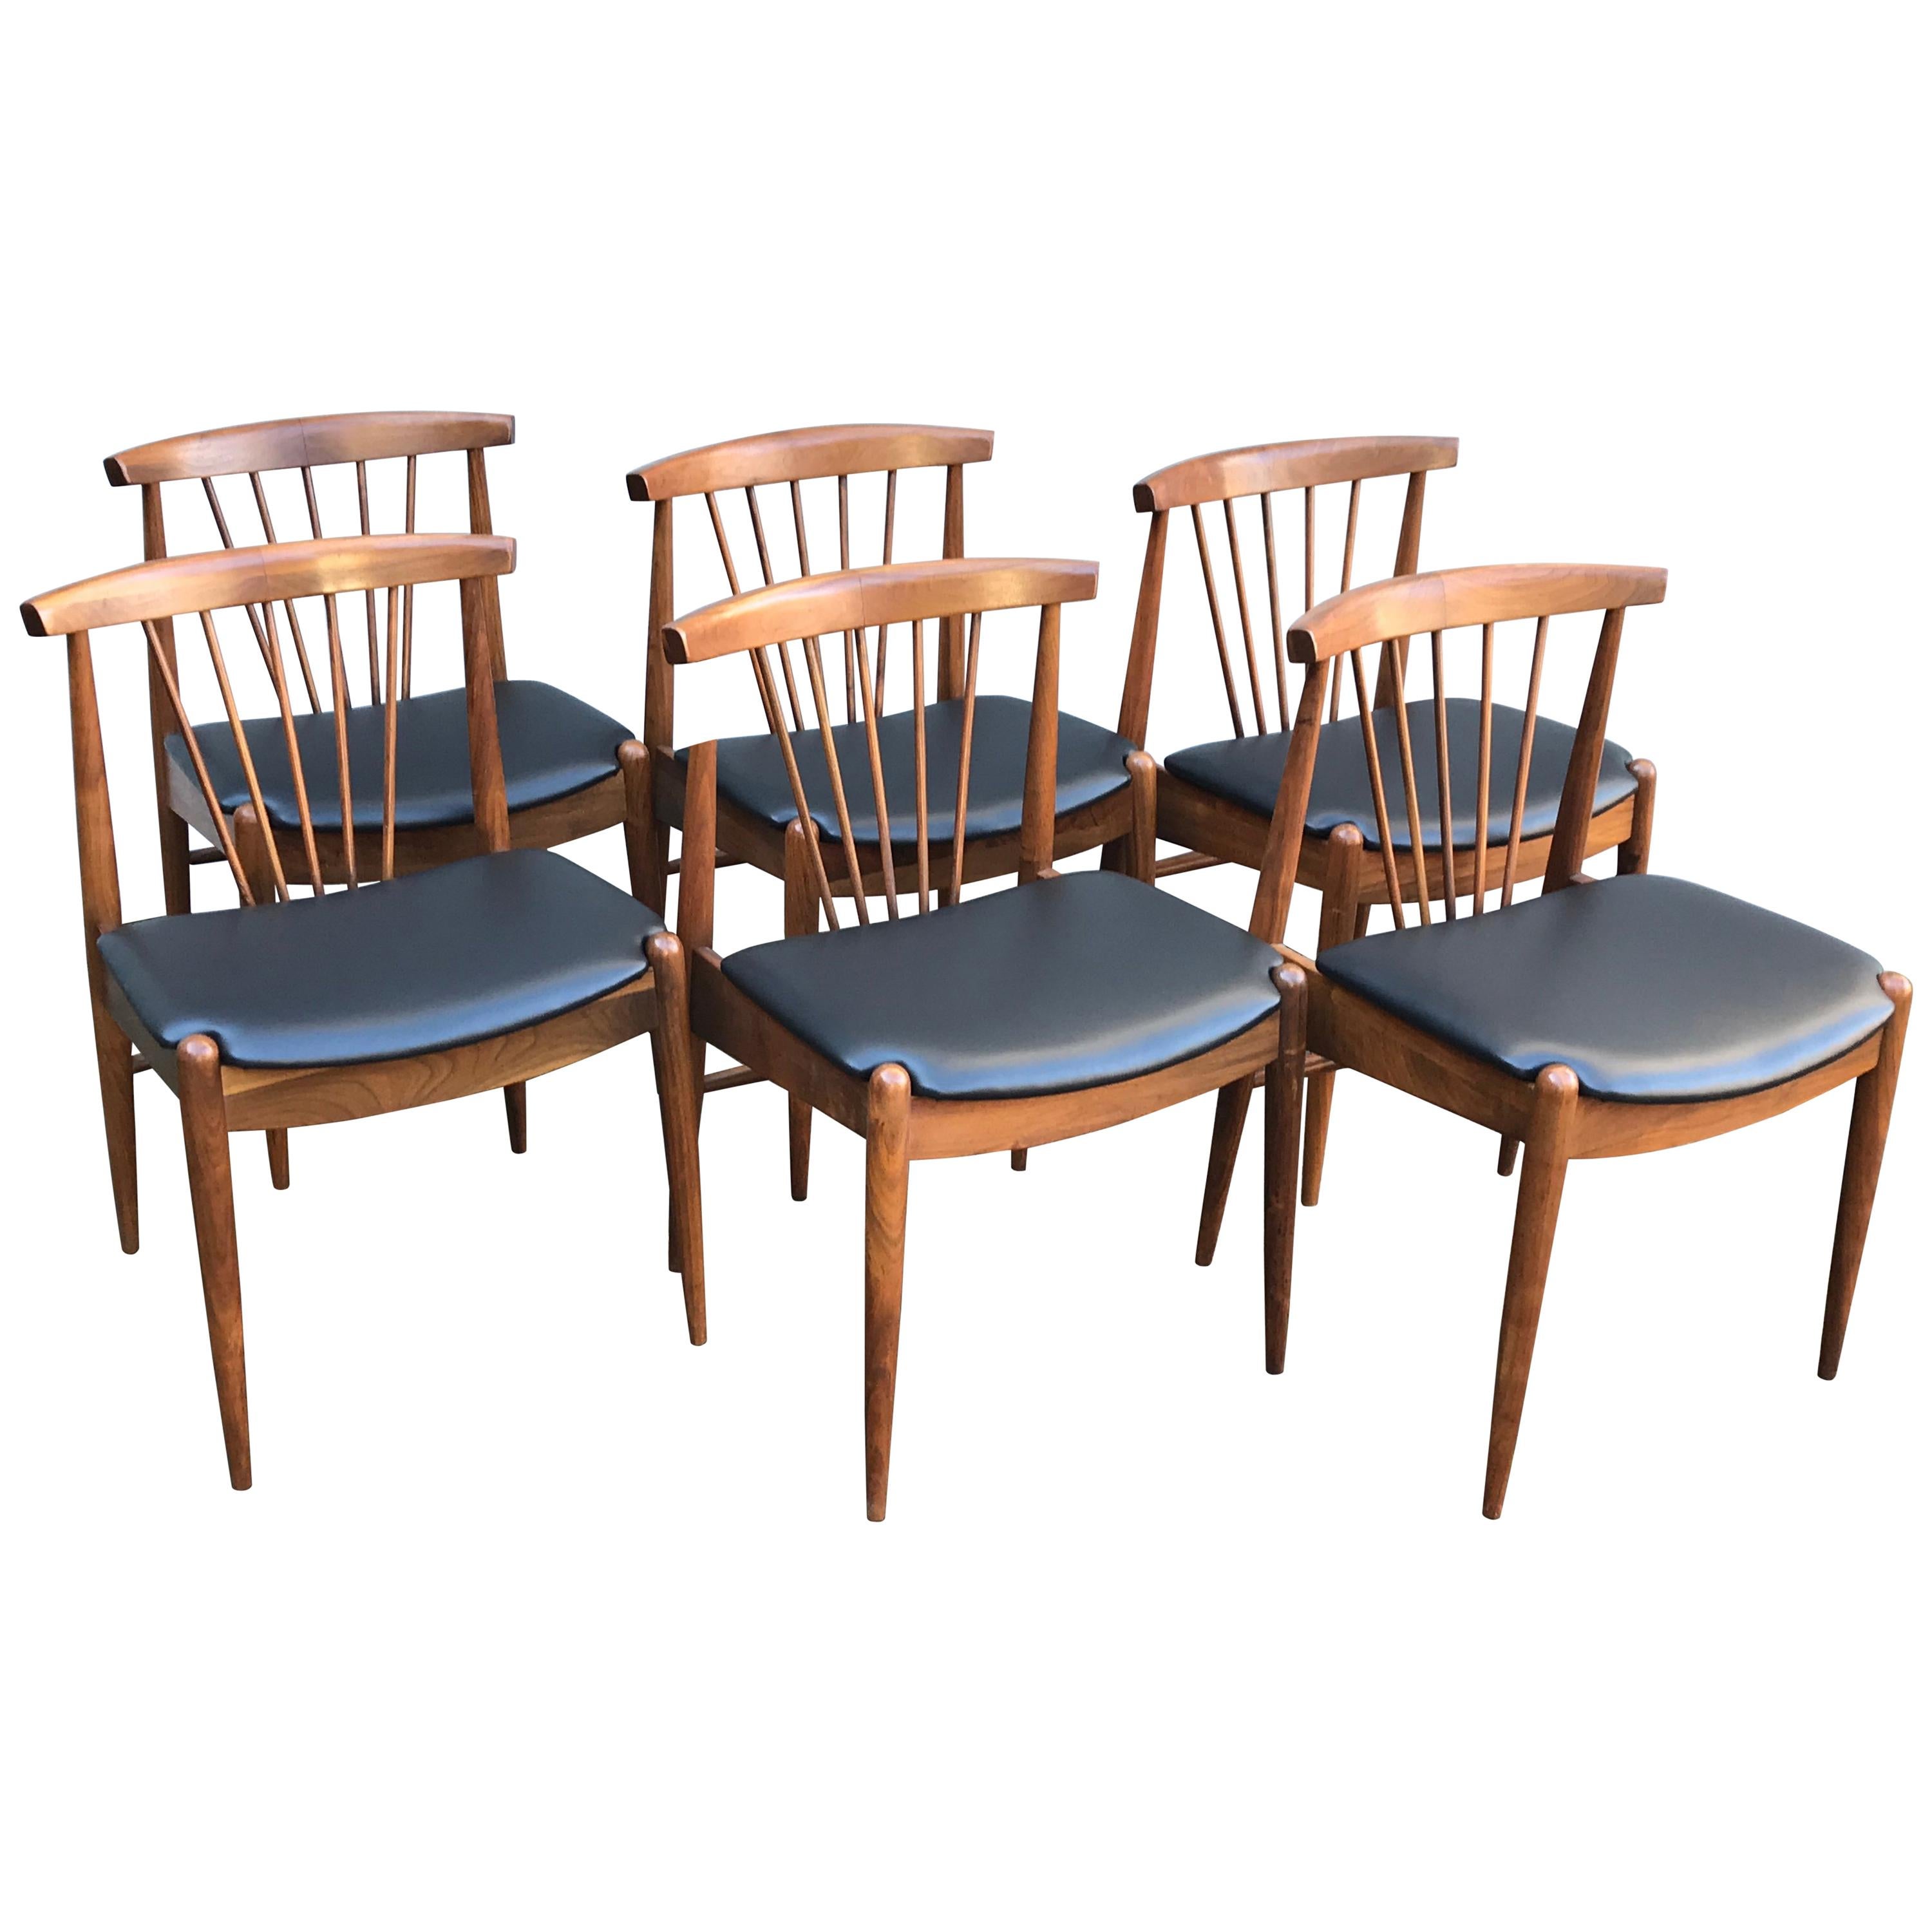 Set of Six Mid Century Walnut Spindle Back Dining Chairs with Black Vinyl Seats